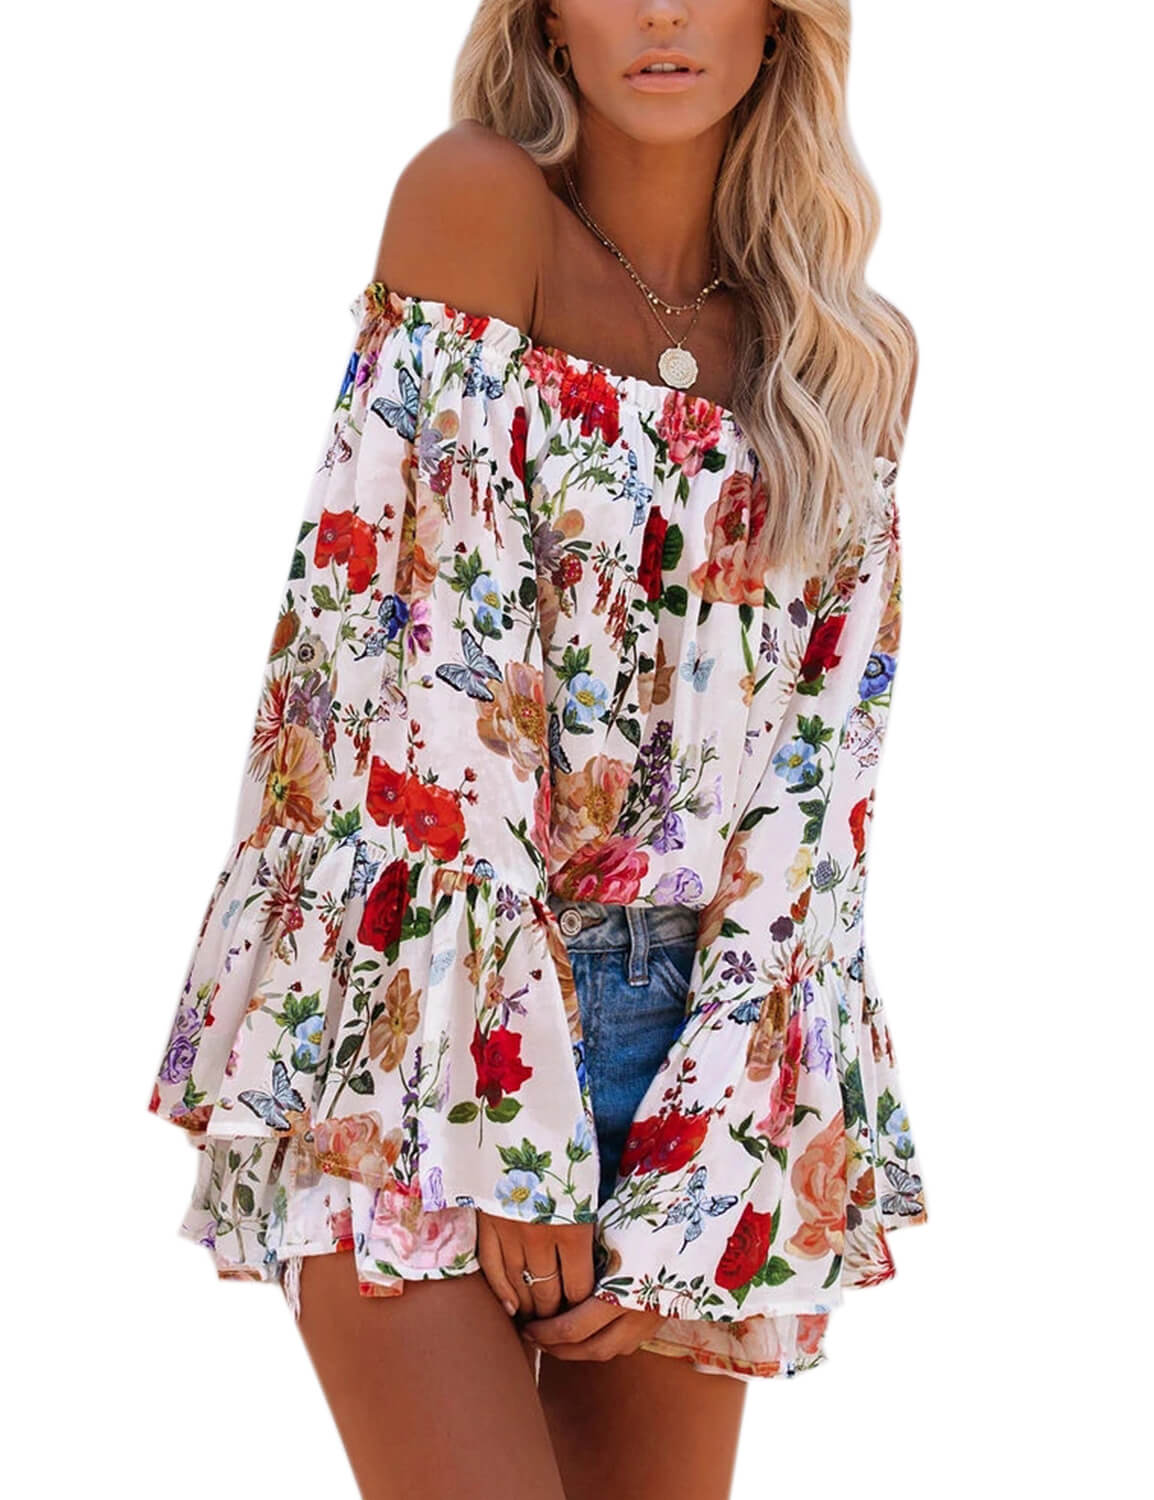 Blooming Jelly_Rose Garden Off Shoulder Floral Blouse_Floral Print_156288_21_Women Fashionable Outfits_Tops_Blouse